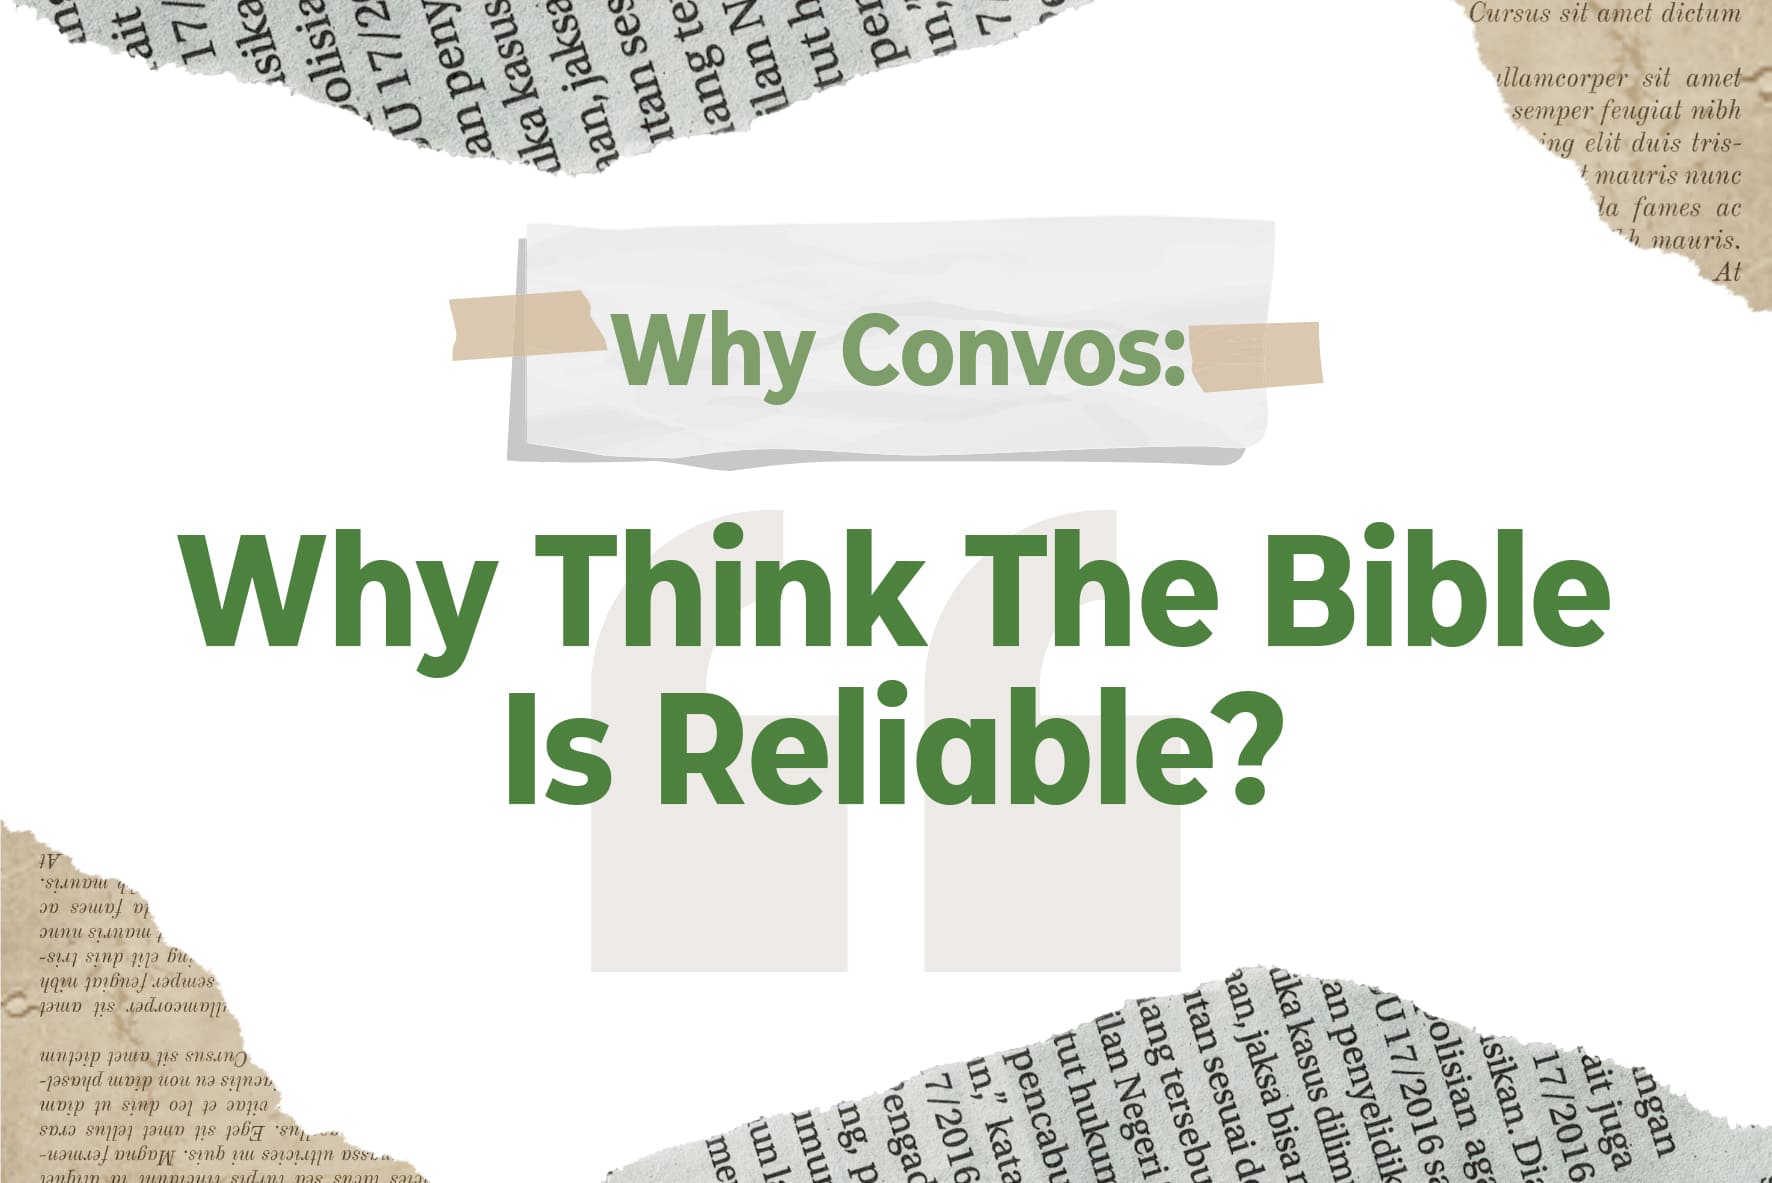 Why Think The Bible Is Reliable?